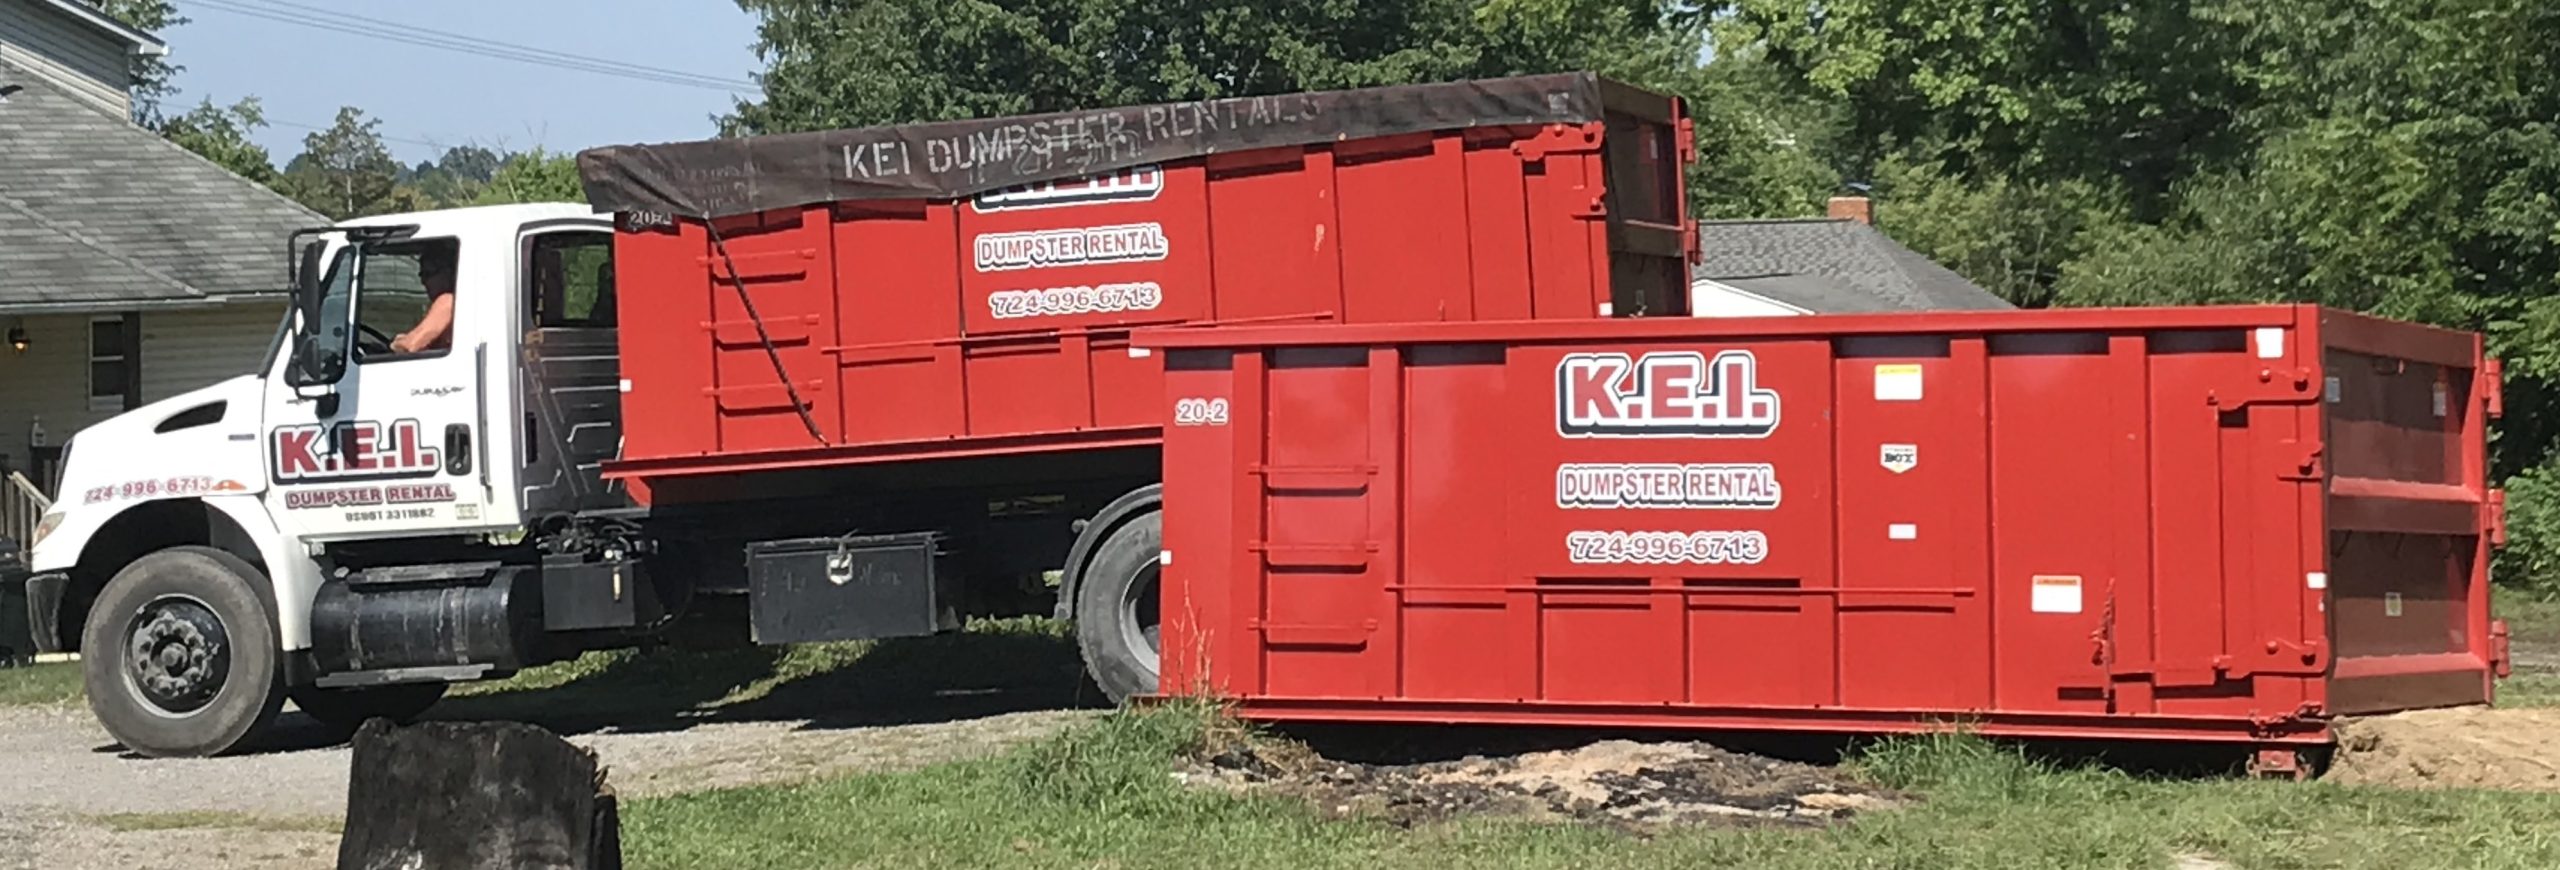 A KEI delivery truck unloads 2 roll-off dumpster rentals in dumpster sizes requested by the customer.